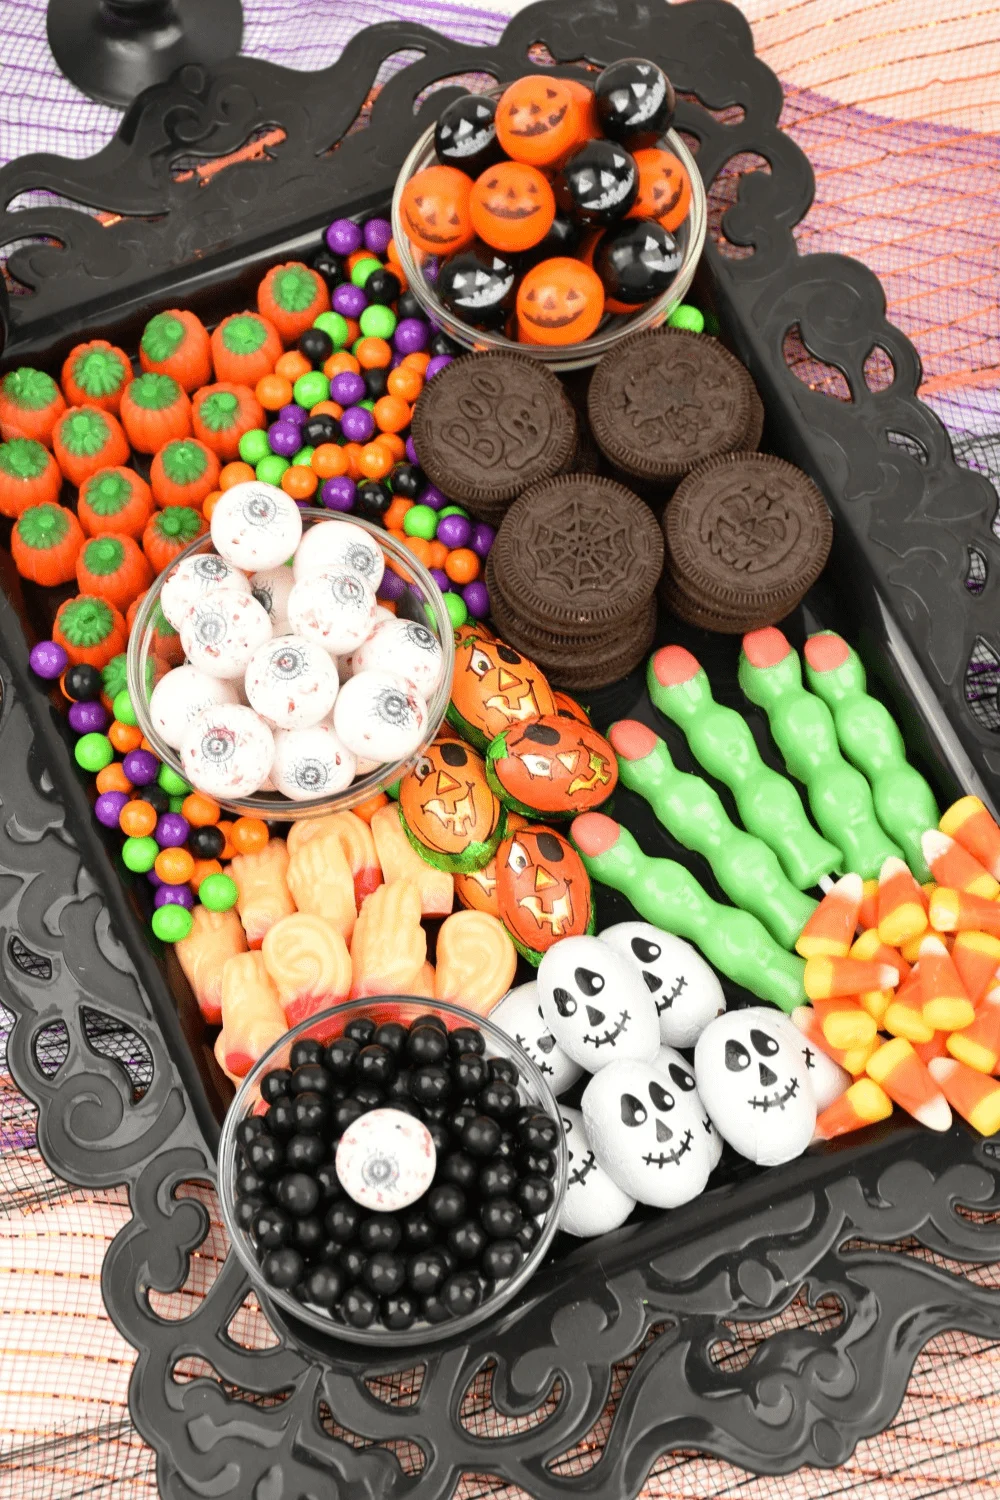 Filled with a delicious selection of traditional Halloween sweets, this chillingly cute Halloween Candy Charcuterie Board is one of my favorite dessert charcuterie boards to make!